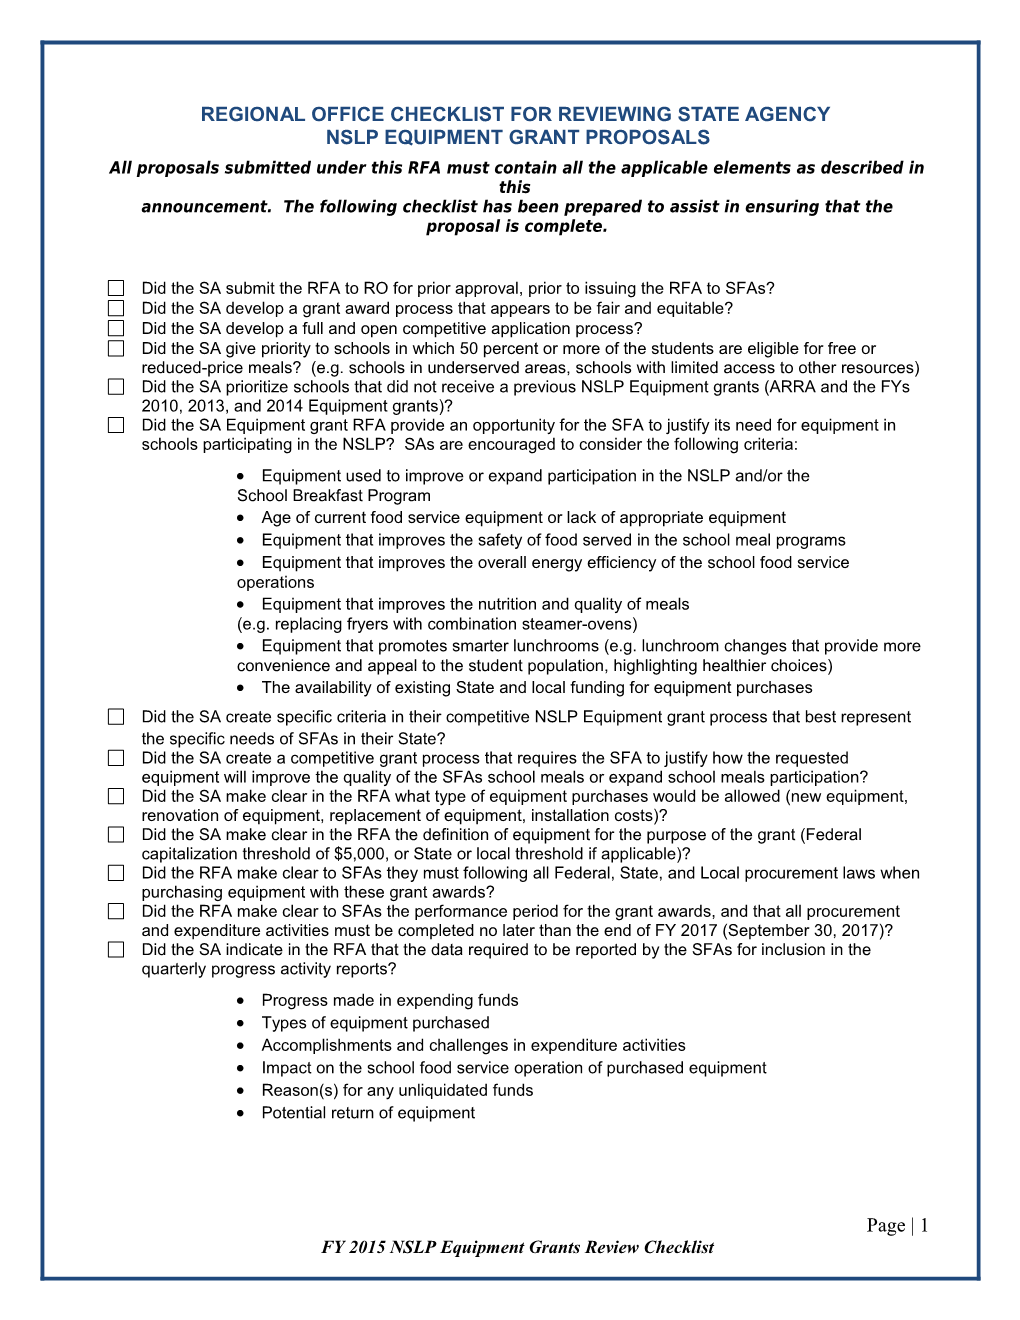 Regional Office Checklist for Reviewing State Agency